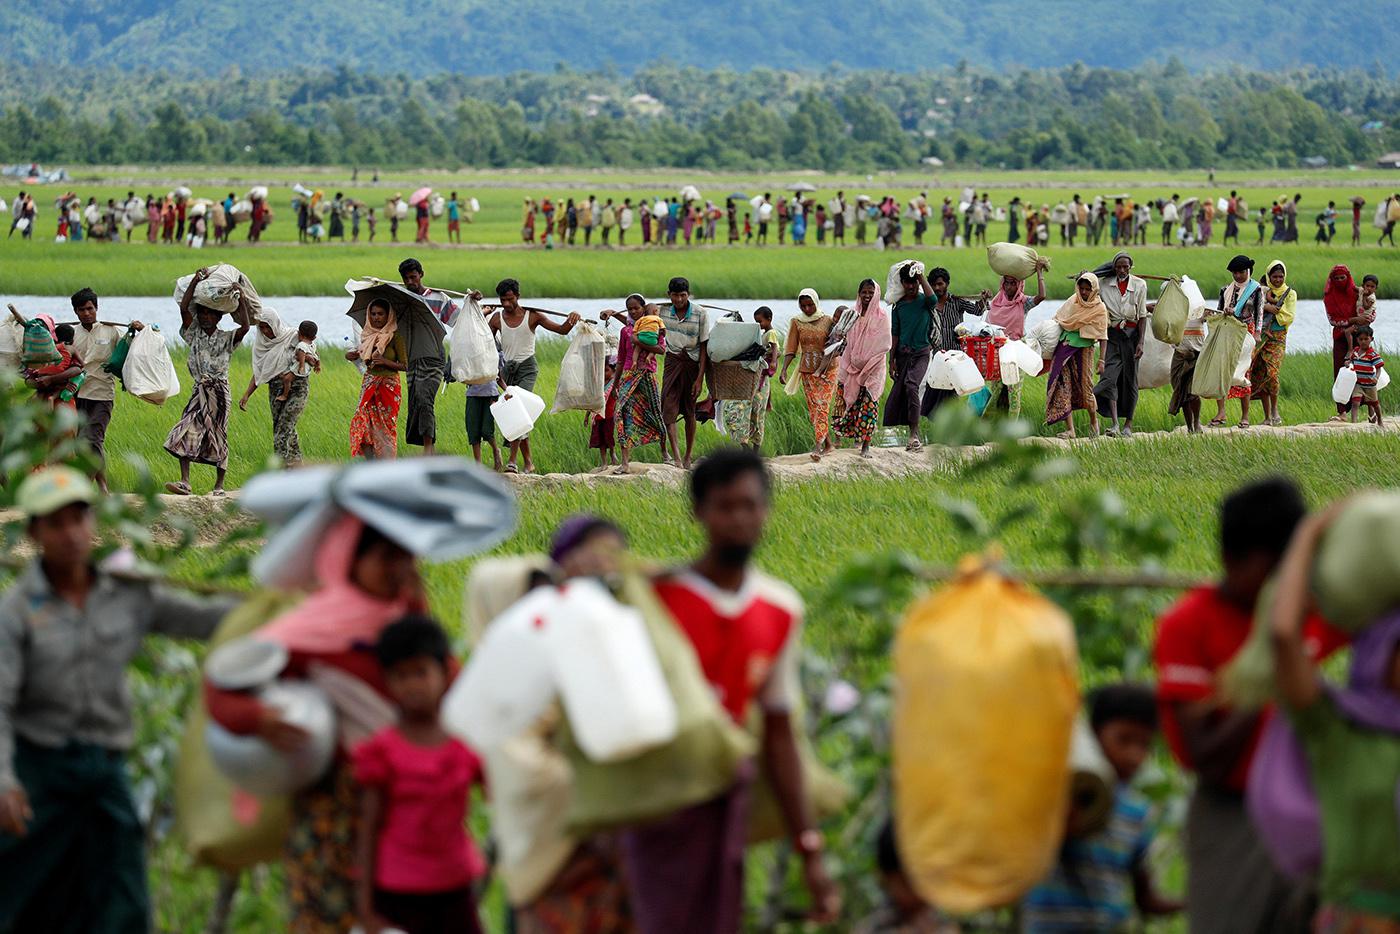 Rohingya refugees walk through rice fields after crossing the border from Myanmar into Palang Khali, Bangladesh, October 19, 2017.